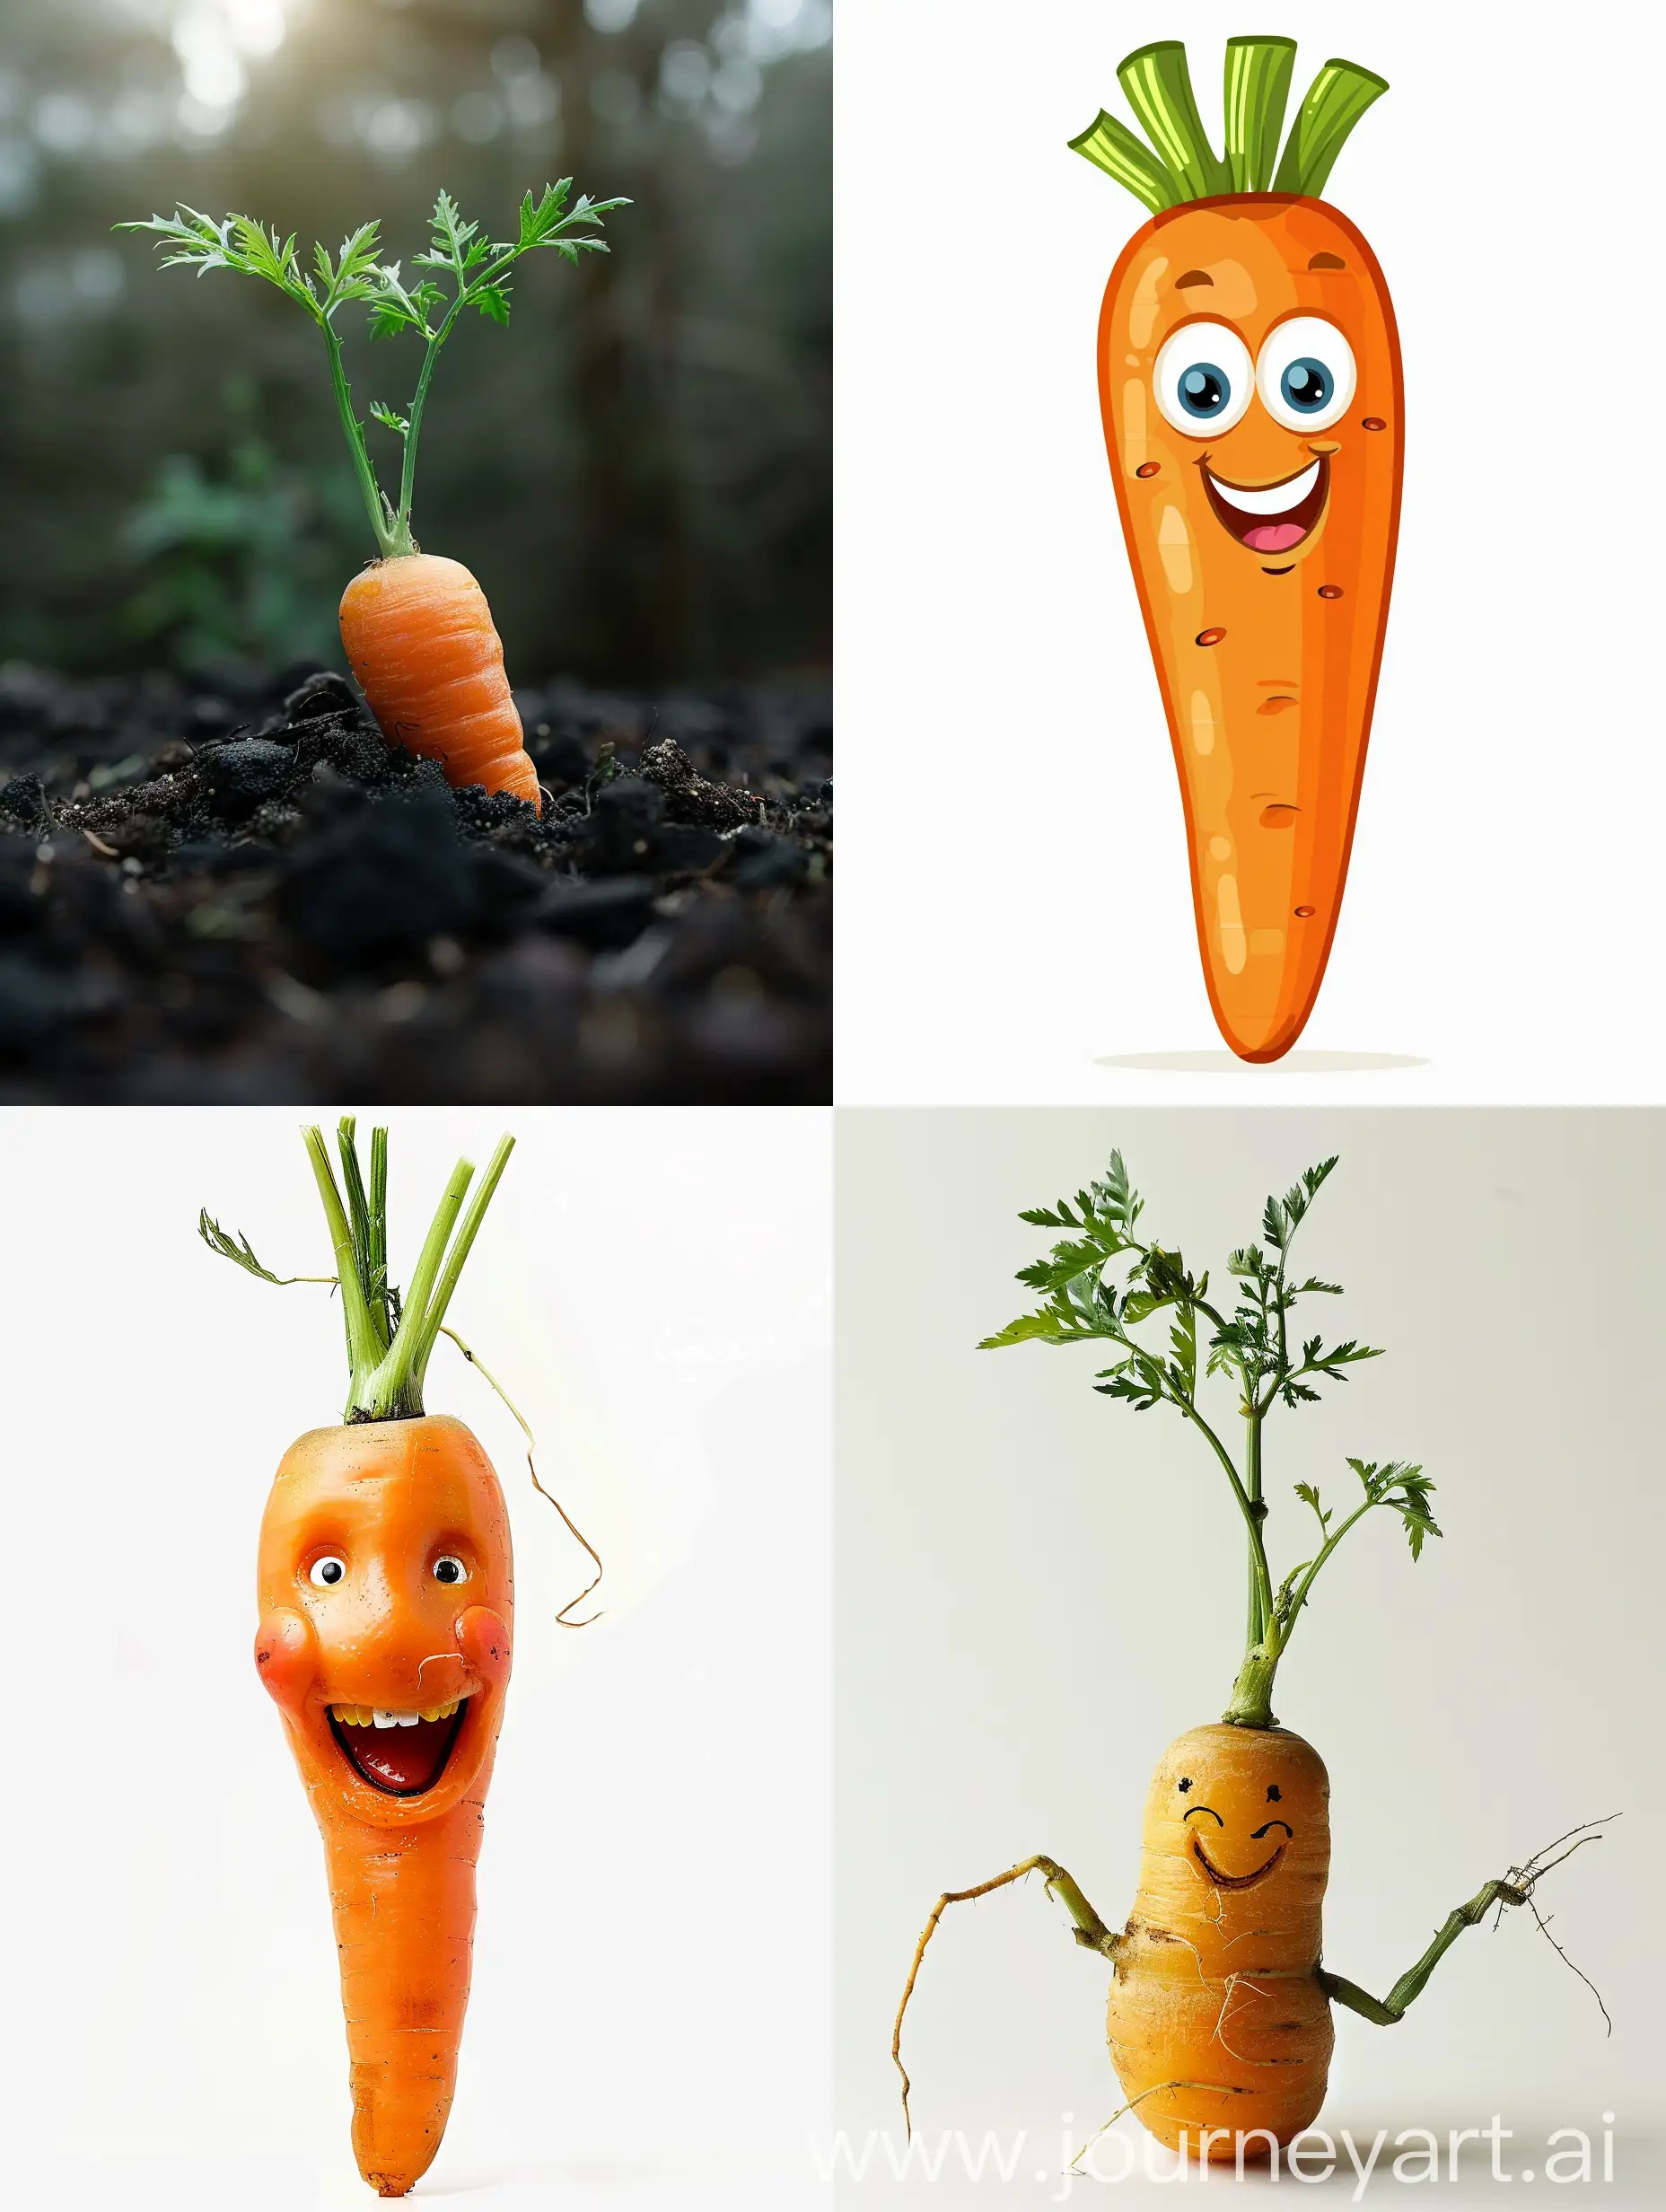 Whimsical-Carrot-Character-with-Playful-Expression